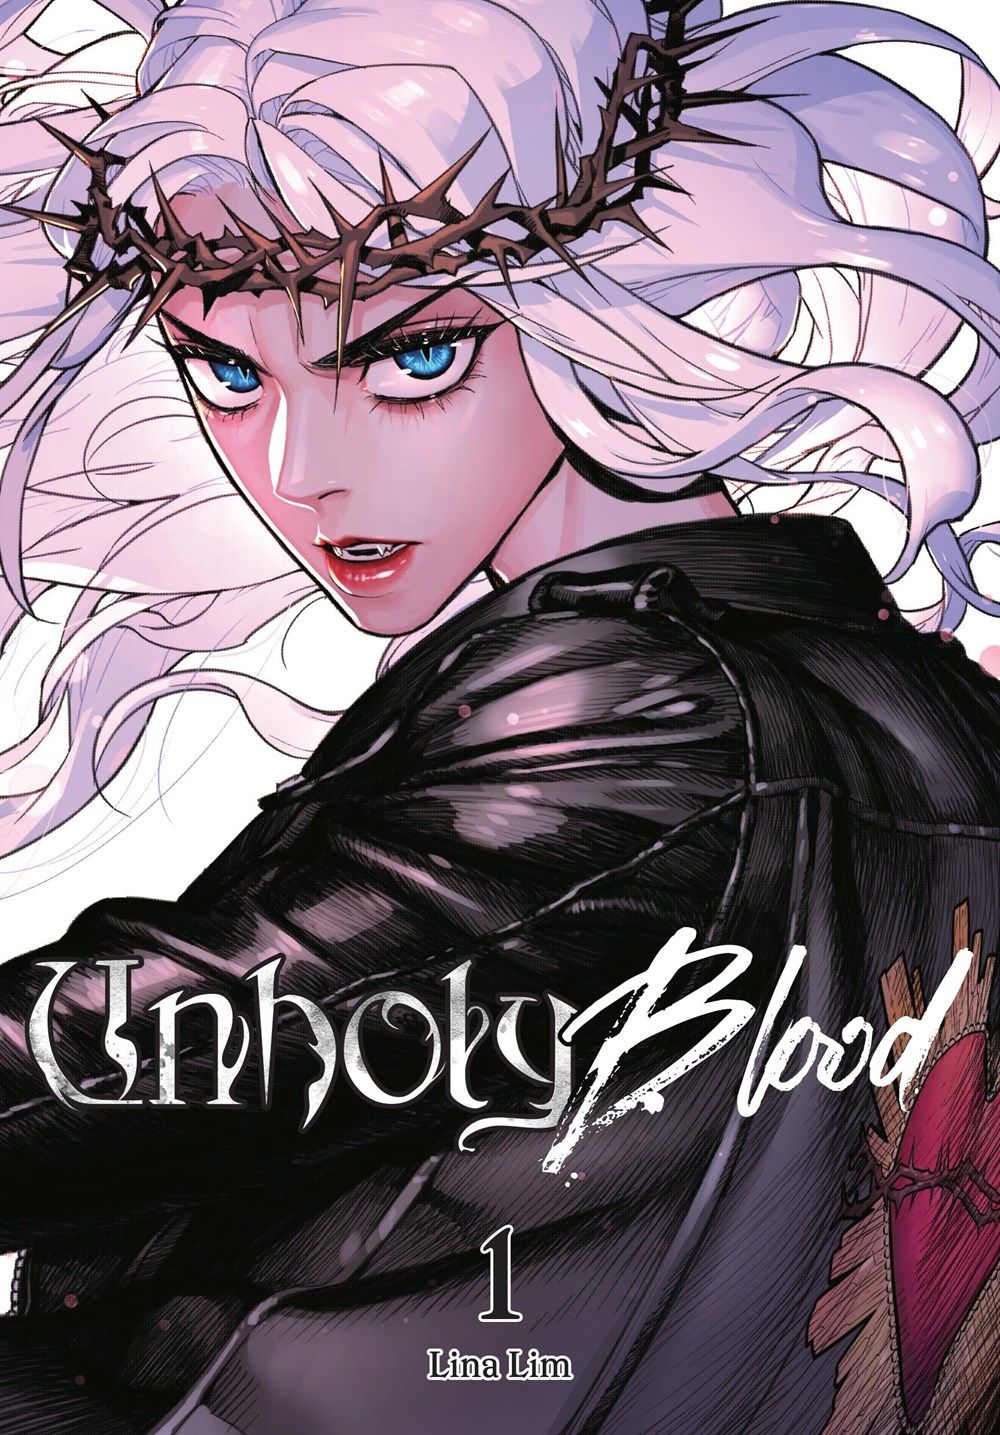 Park Hayan on the Unholy Blood Cover